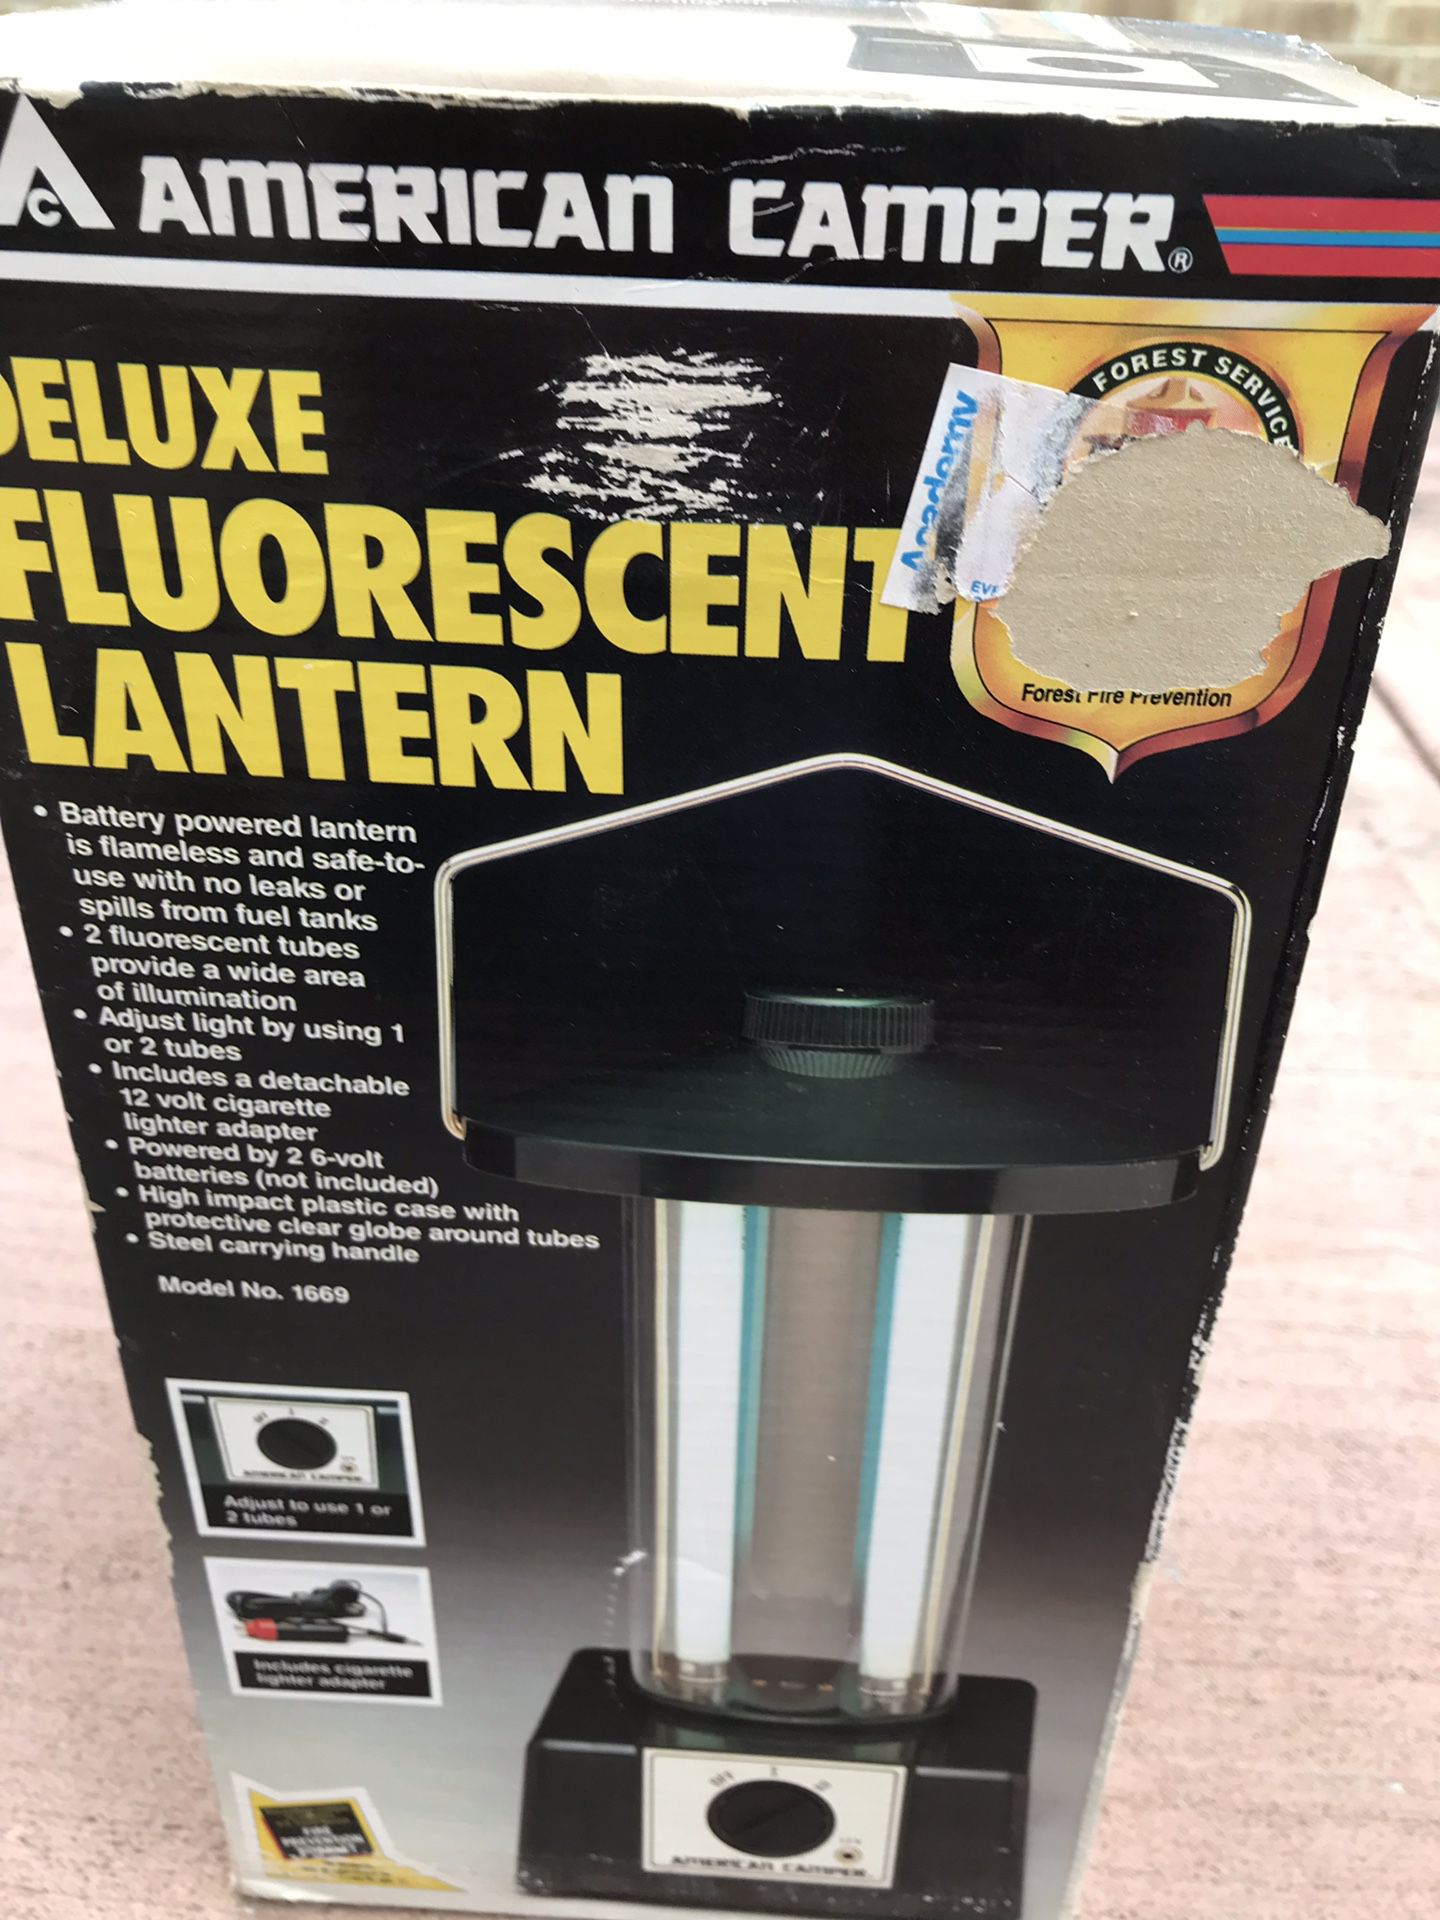 Vont 2 Pack LED Camping Lantern for Sale in Pasadena, TX - OfferUp